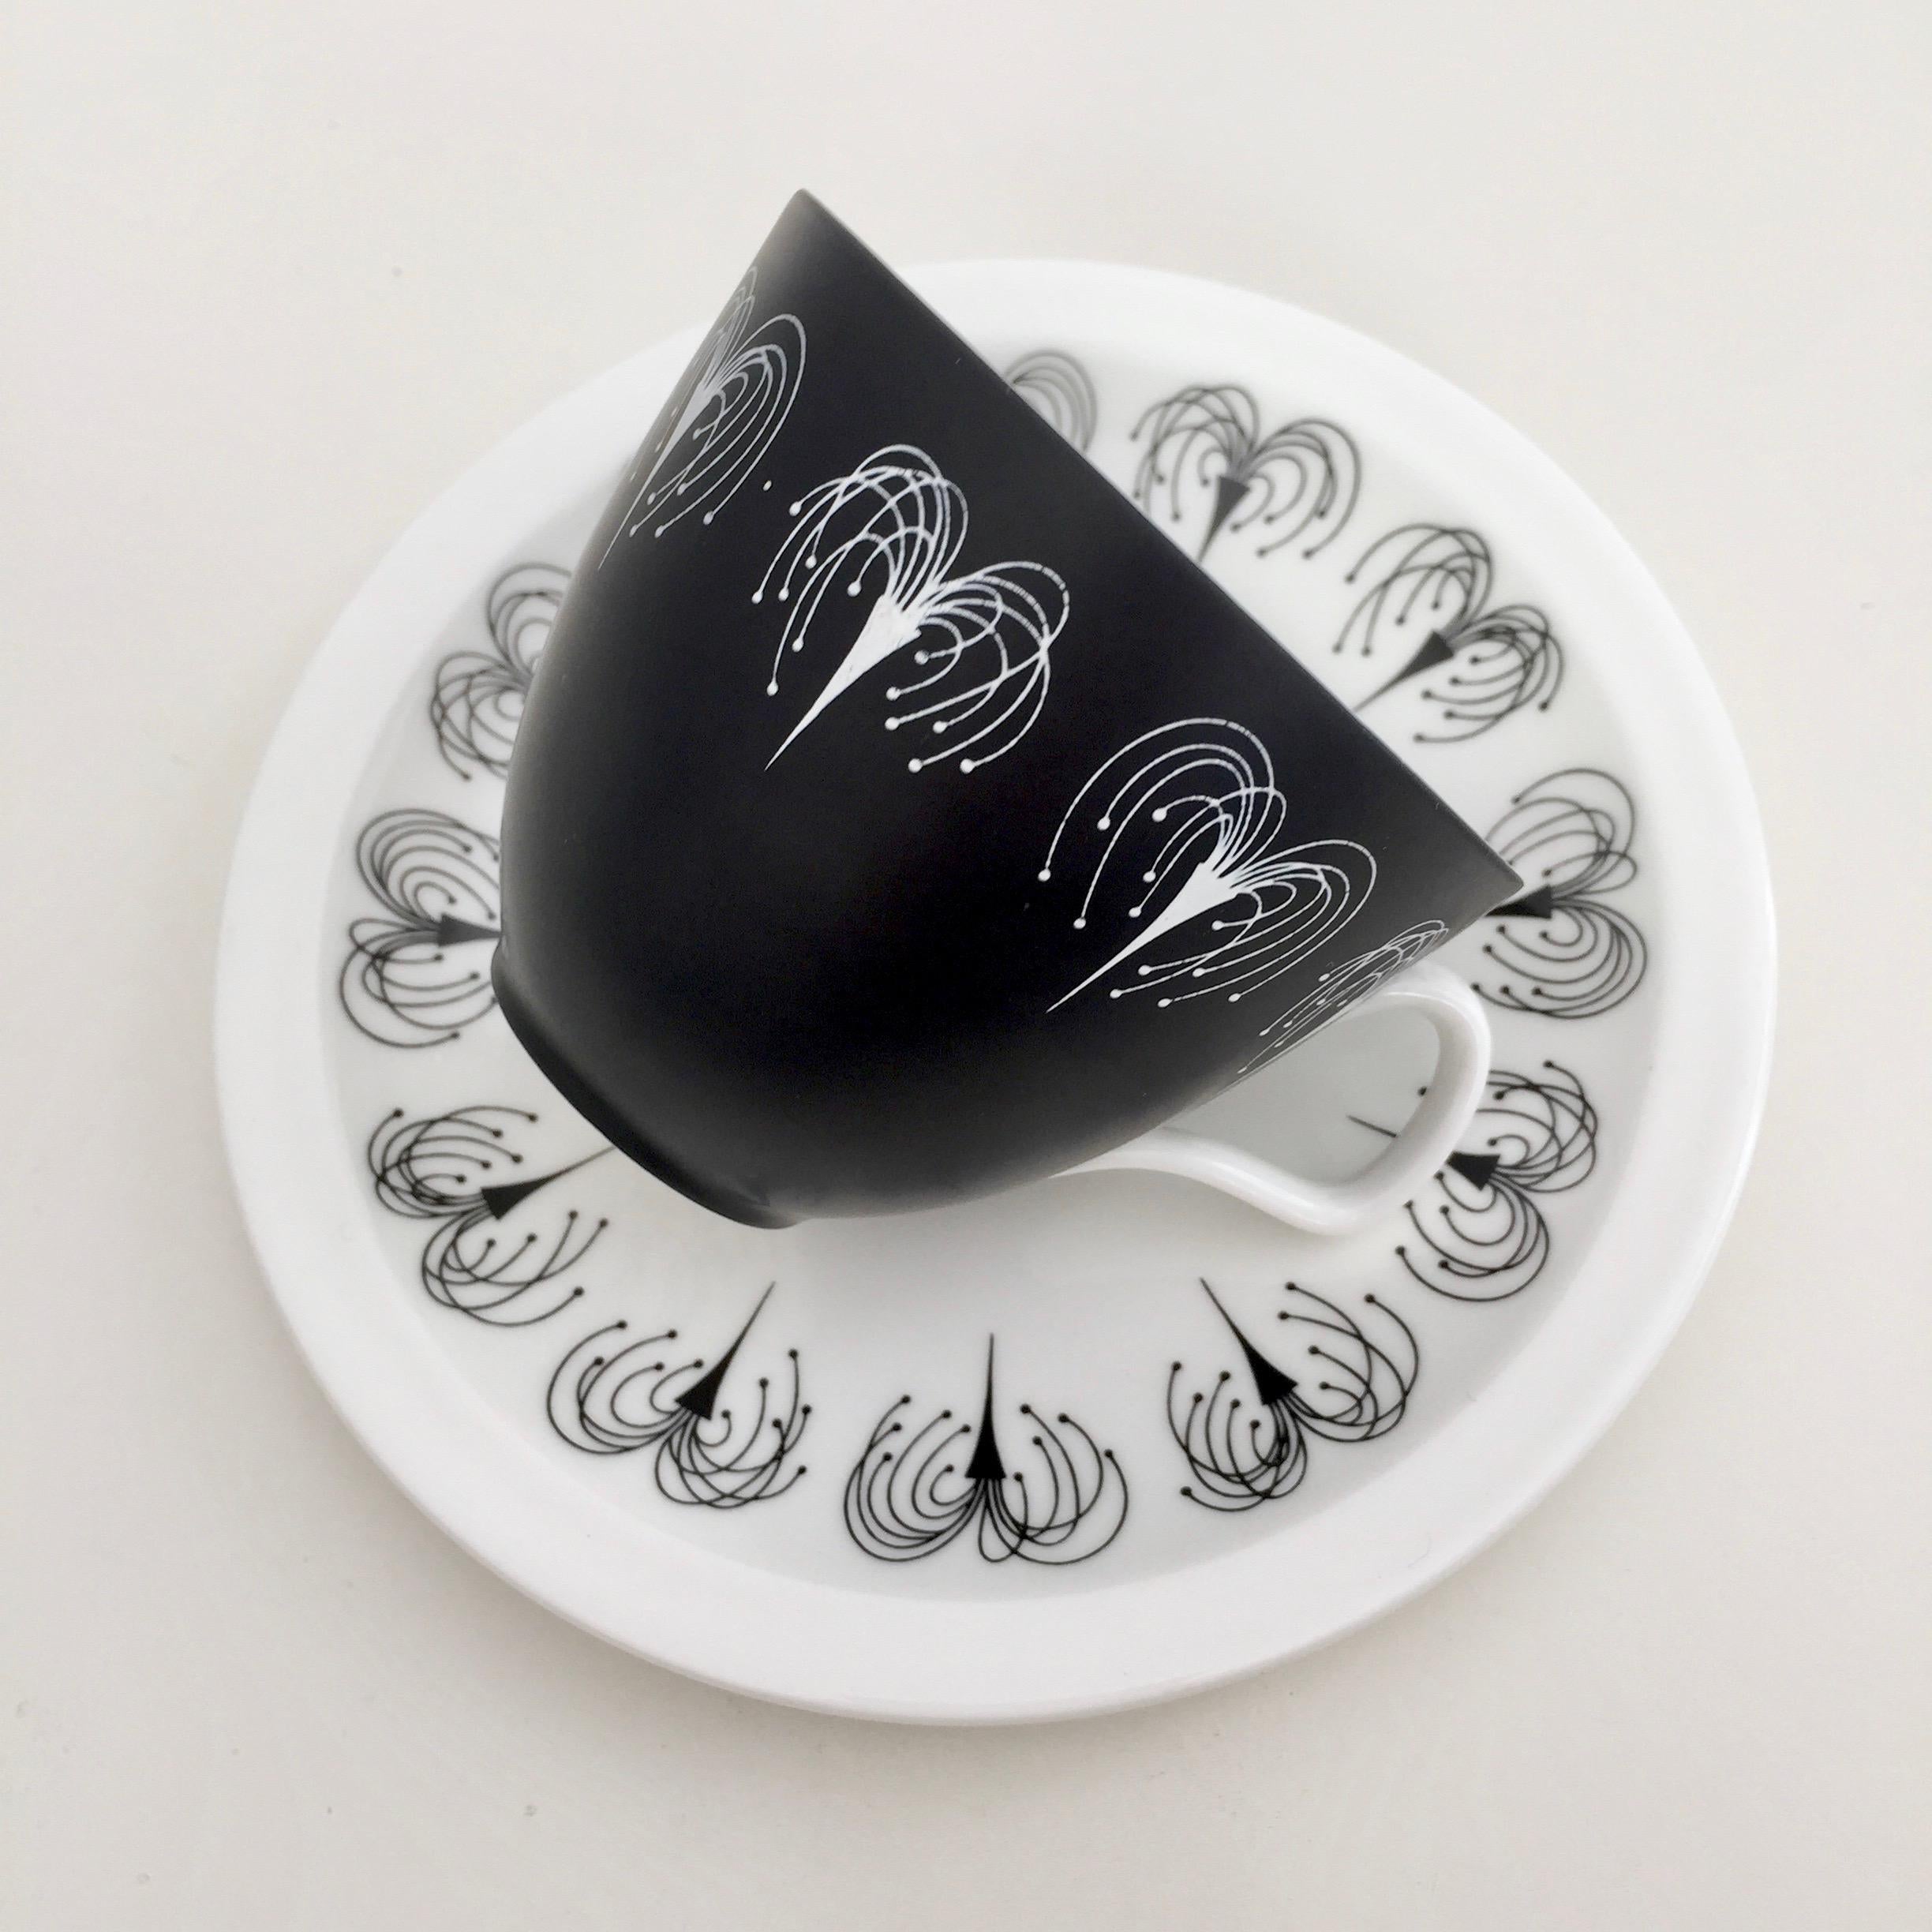 Mid-20th Century Foley Porcelain Coffee Service, Black and White Domino Midcentury Modern ca 1960